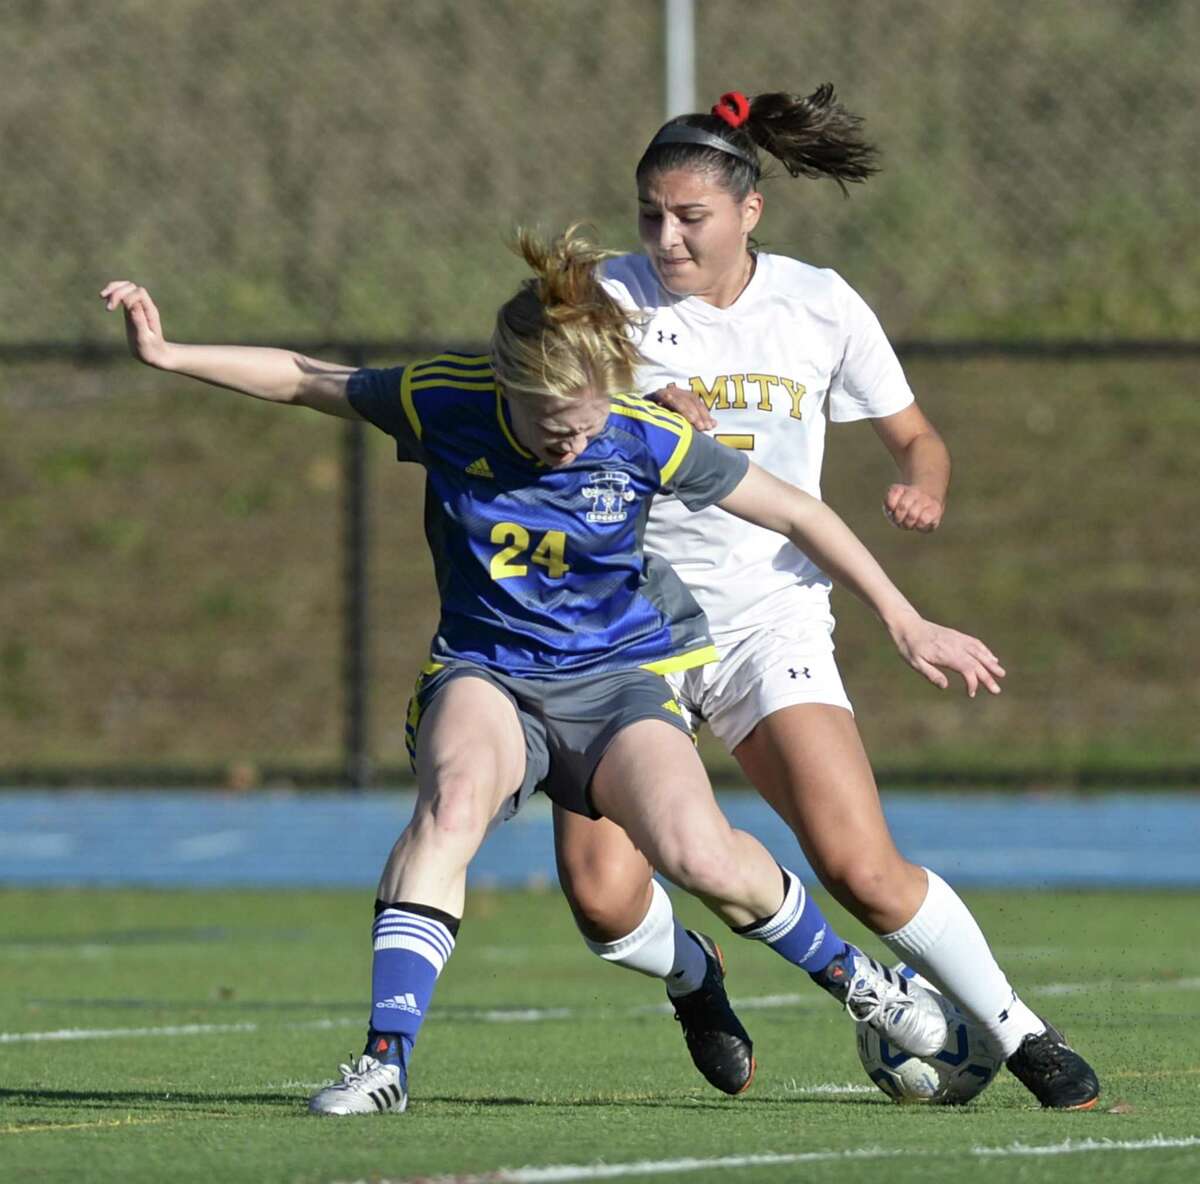 Newtown's Ally McCarthy (24) gets the ball away form Amity's Julia Potter (5) in the girls LL soccer game between Amity and Newtown high schools, Wednesday, November 7, 2018, at Newtown High School, Newtown, Conn. Newtown defeated Amity 1-0.